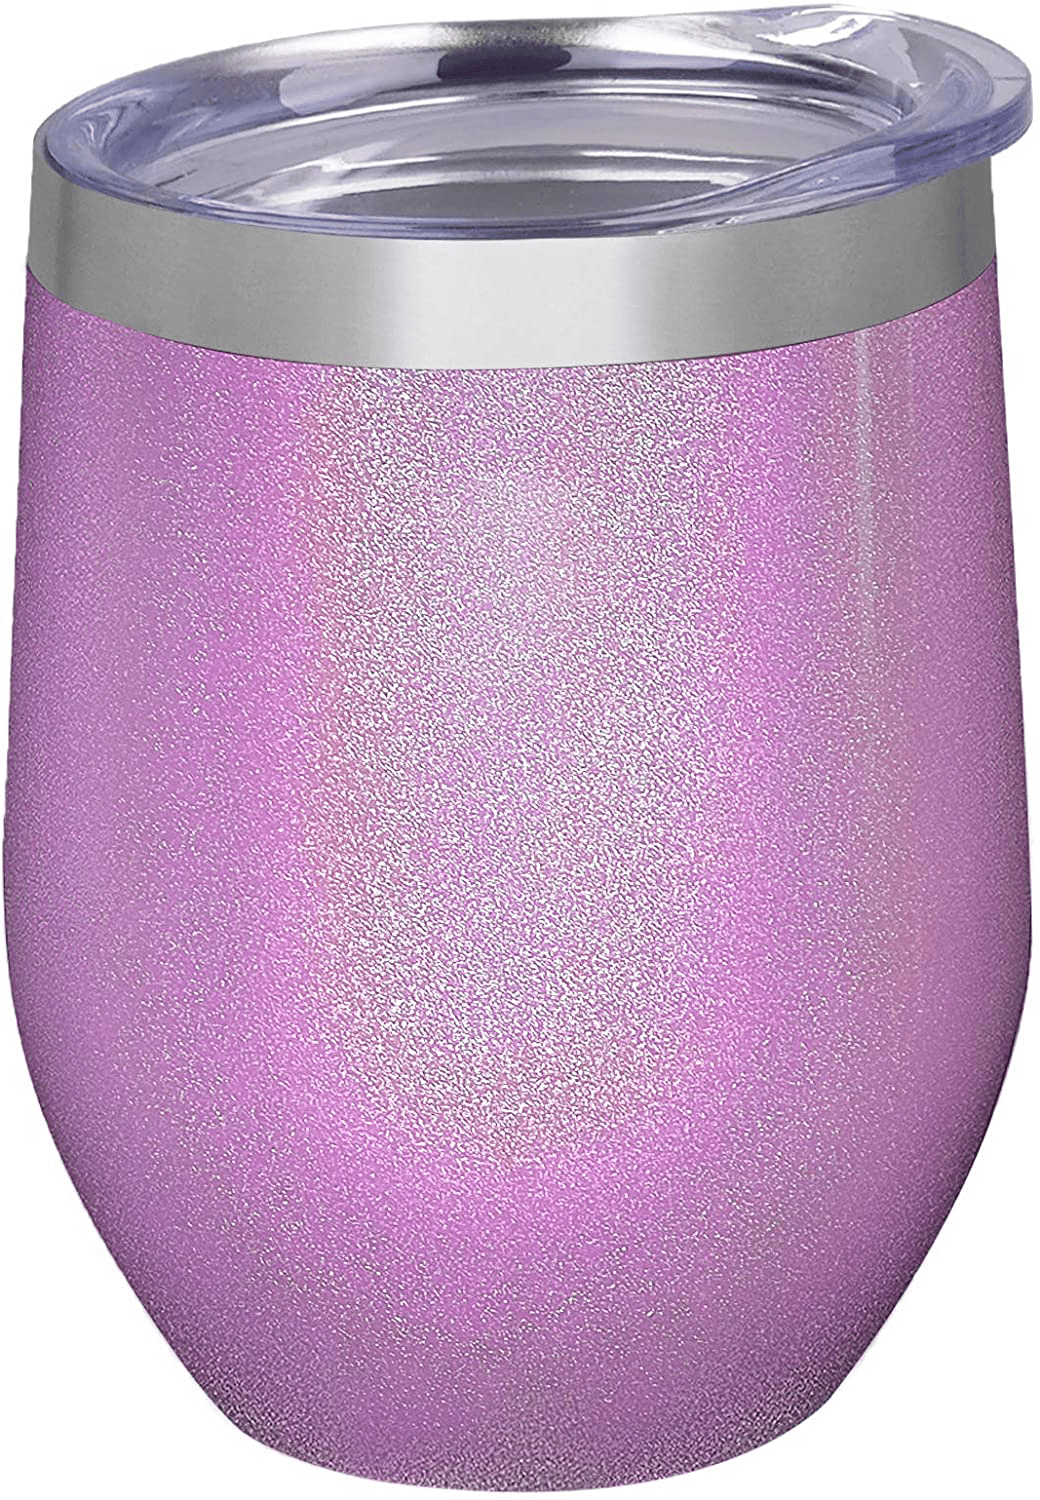 SUNWILL Insulated Wine Tumbler with Lid Rose Gold Double Wall Stainless Steel 